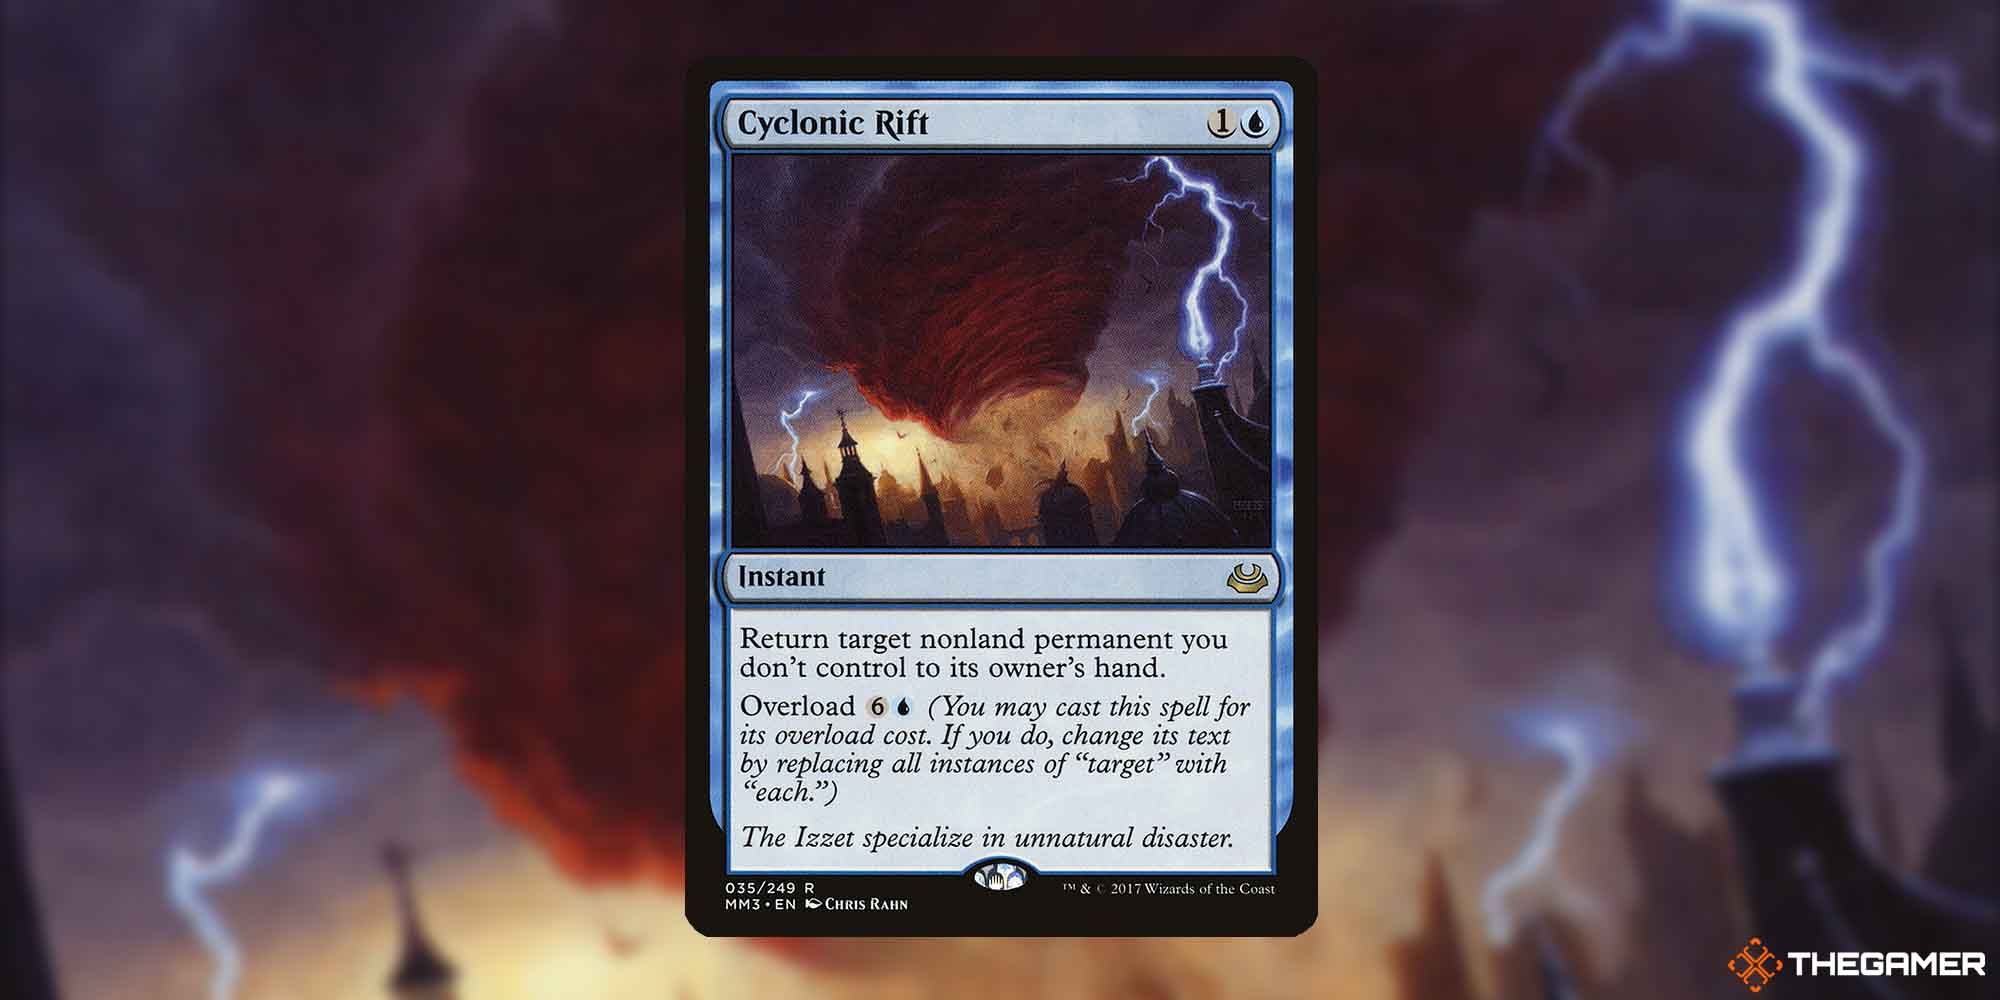 The Cyclonic Rift Instant In Magic the Gathering